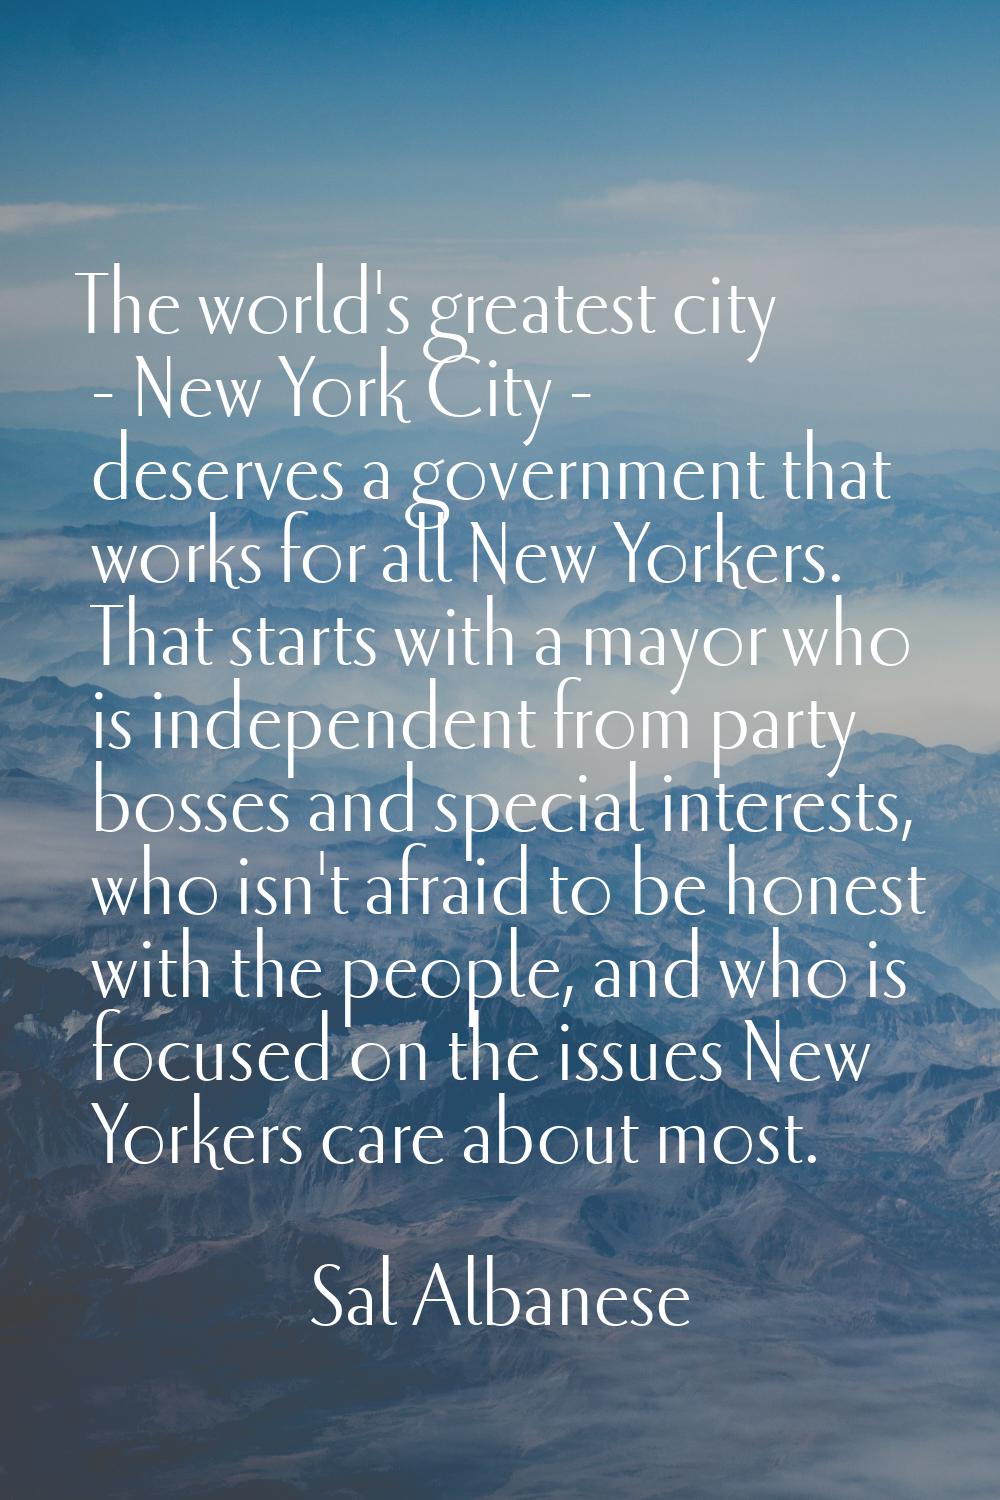 The world's greatest city - New York City - deserves a government that works for all New Yorkers. T